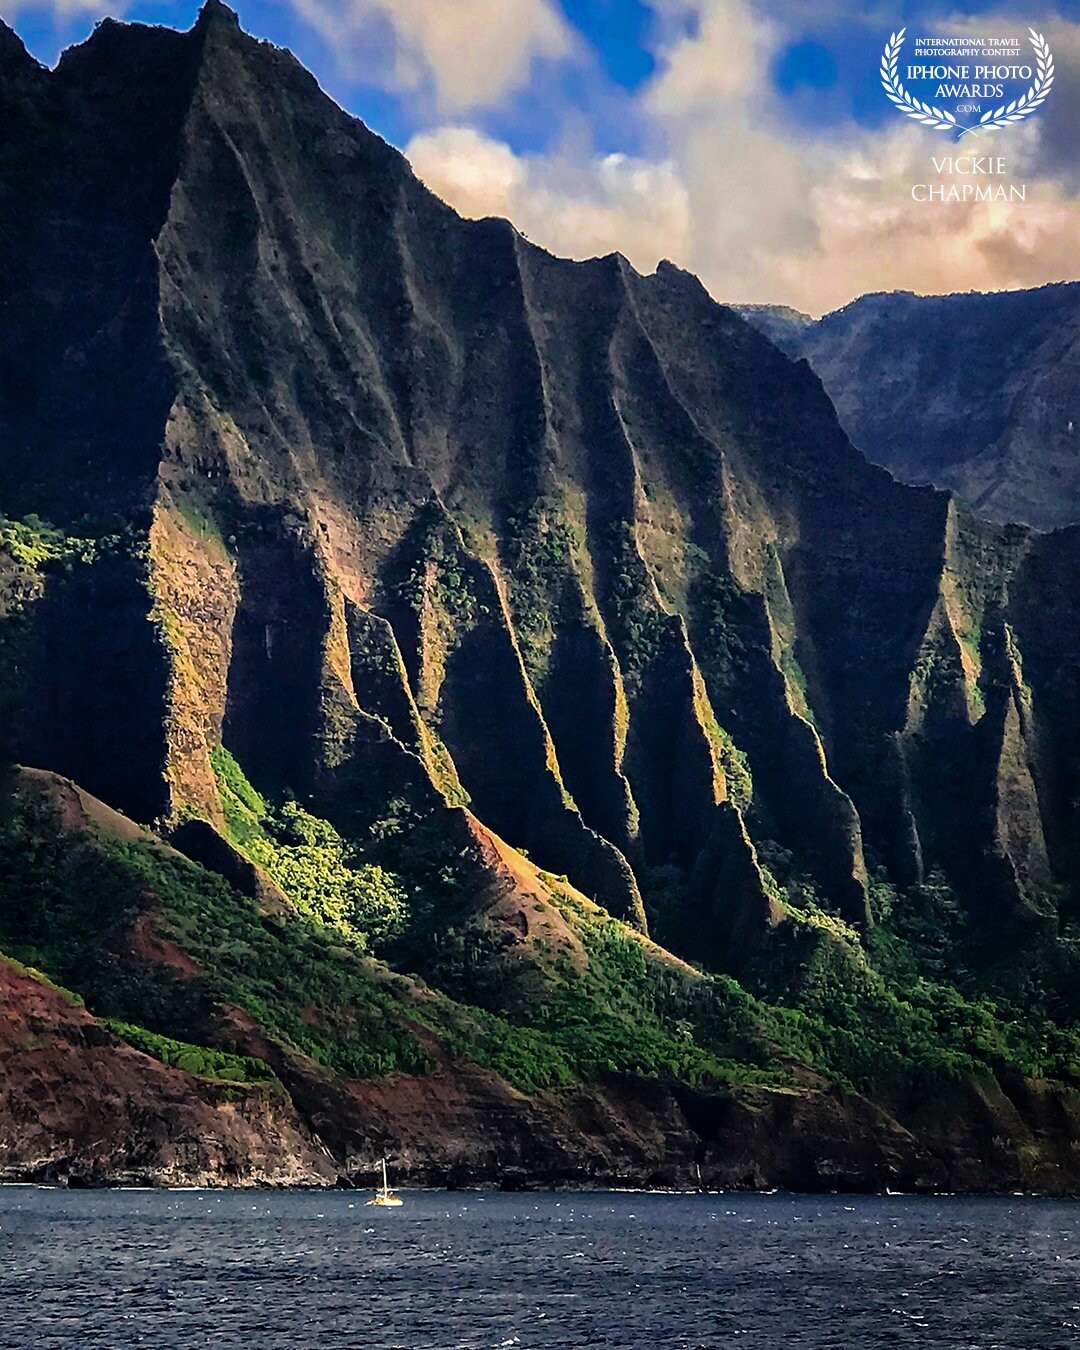 Island Magic<br />
This photo was captured as the cruise ship I was on, was passing the island of Kauai, HI. The island at this angle was fairly nondescript and unimpressive until the setting sun hit it just right. Then it was jaw dropping. It was amazing to watch the light show unfold before my eyes. The photo was made with my iPhone 11Pro Max from a moving boat and hand held!